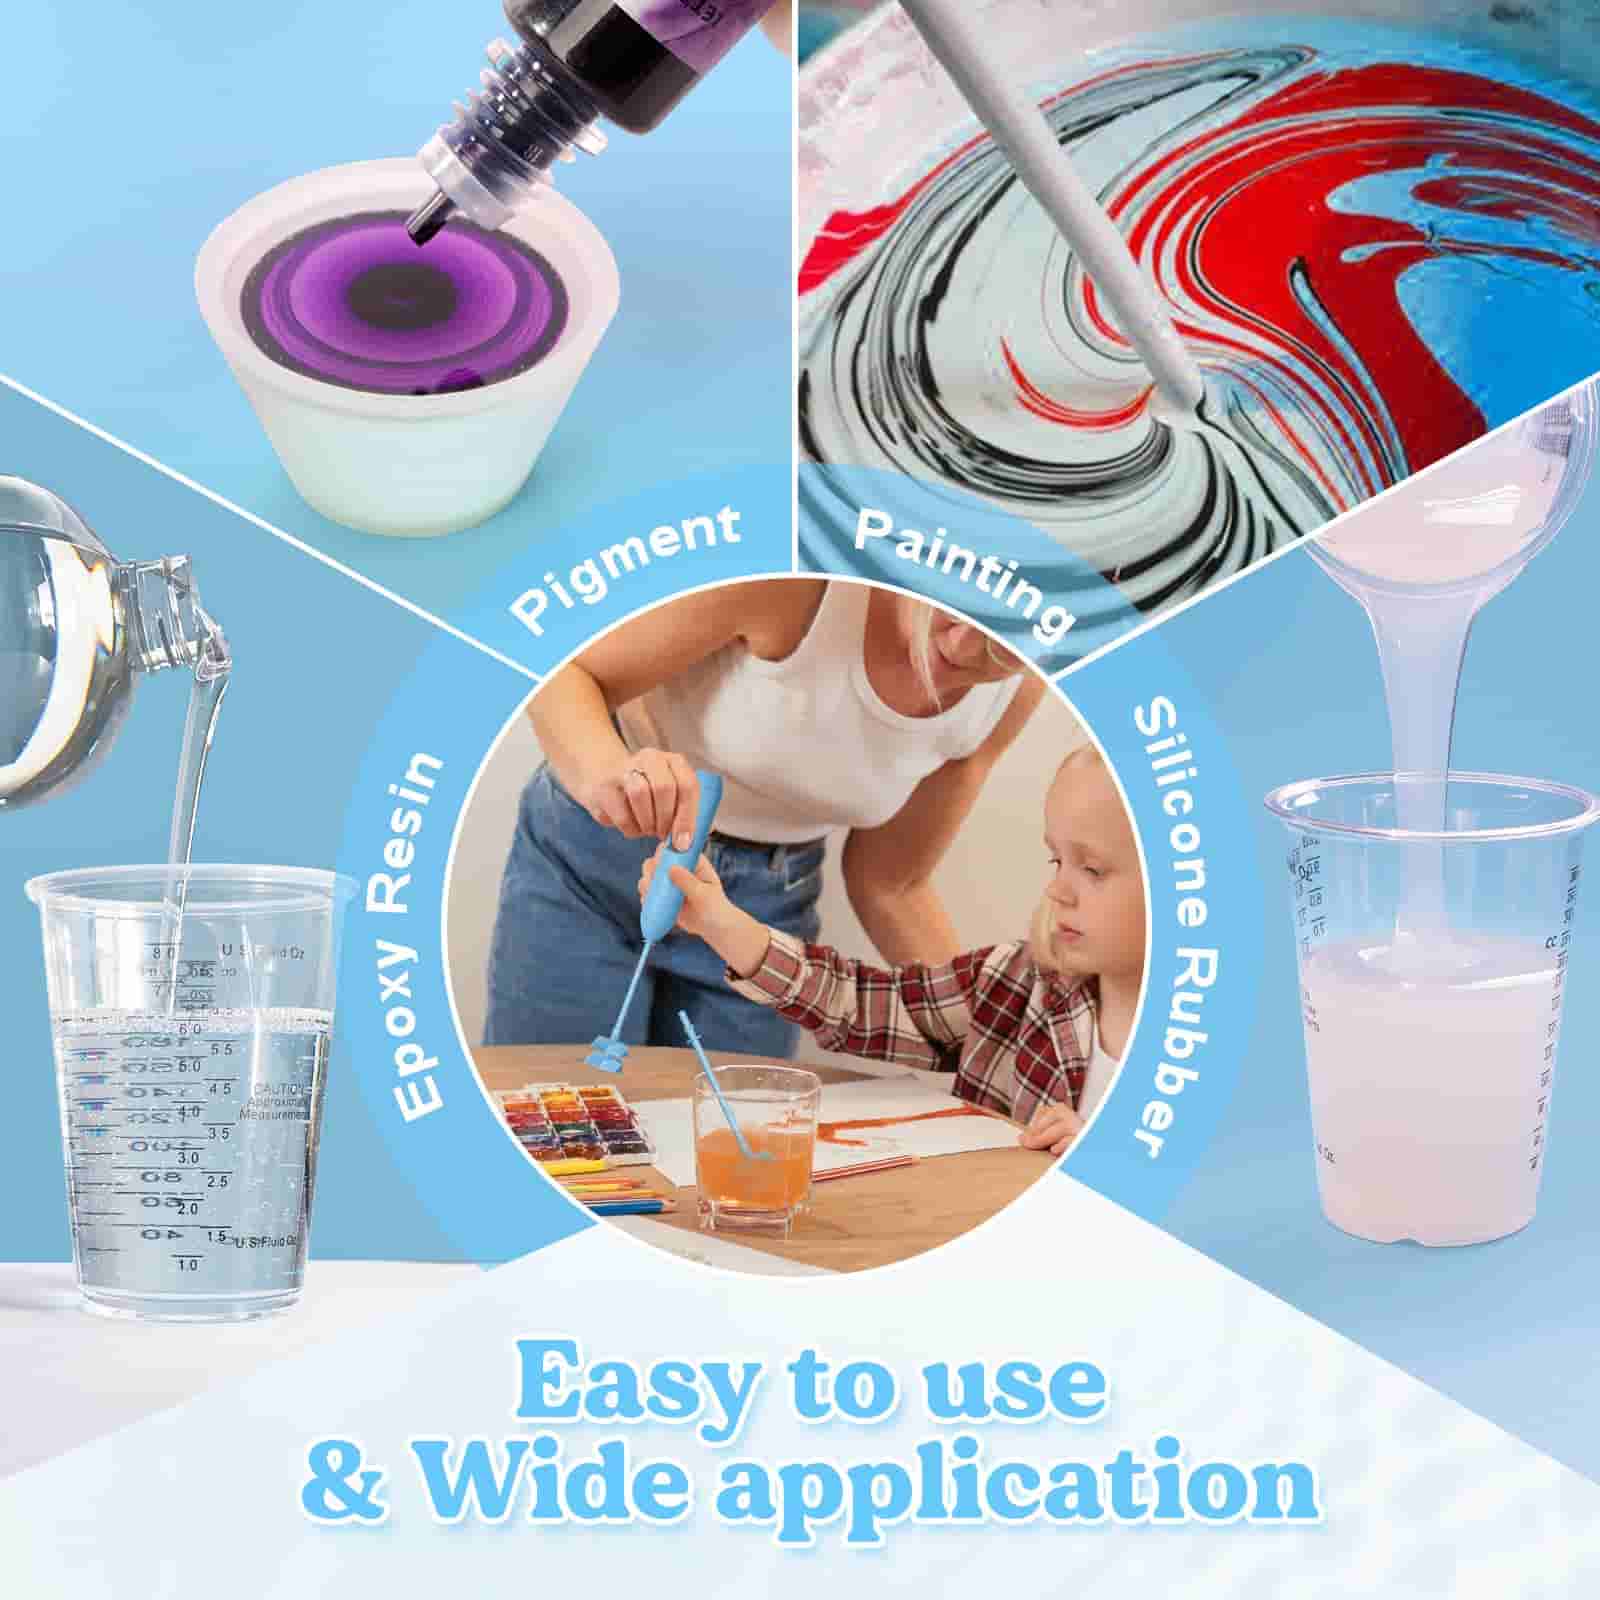 mixer paddles easy to use and wide application, such as epoxy resin, pigment, painting and silicone rubber